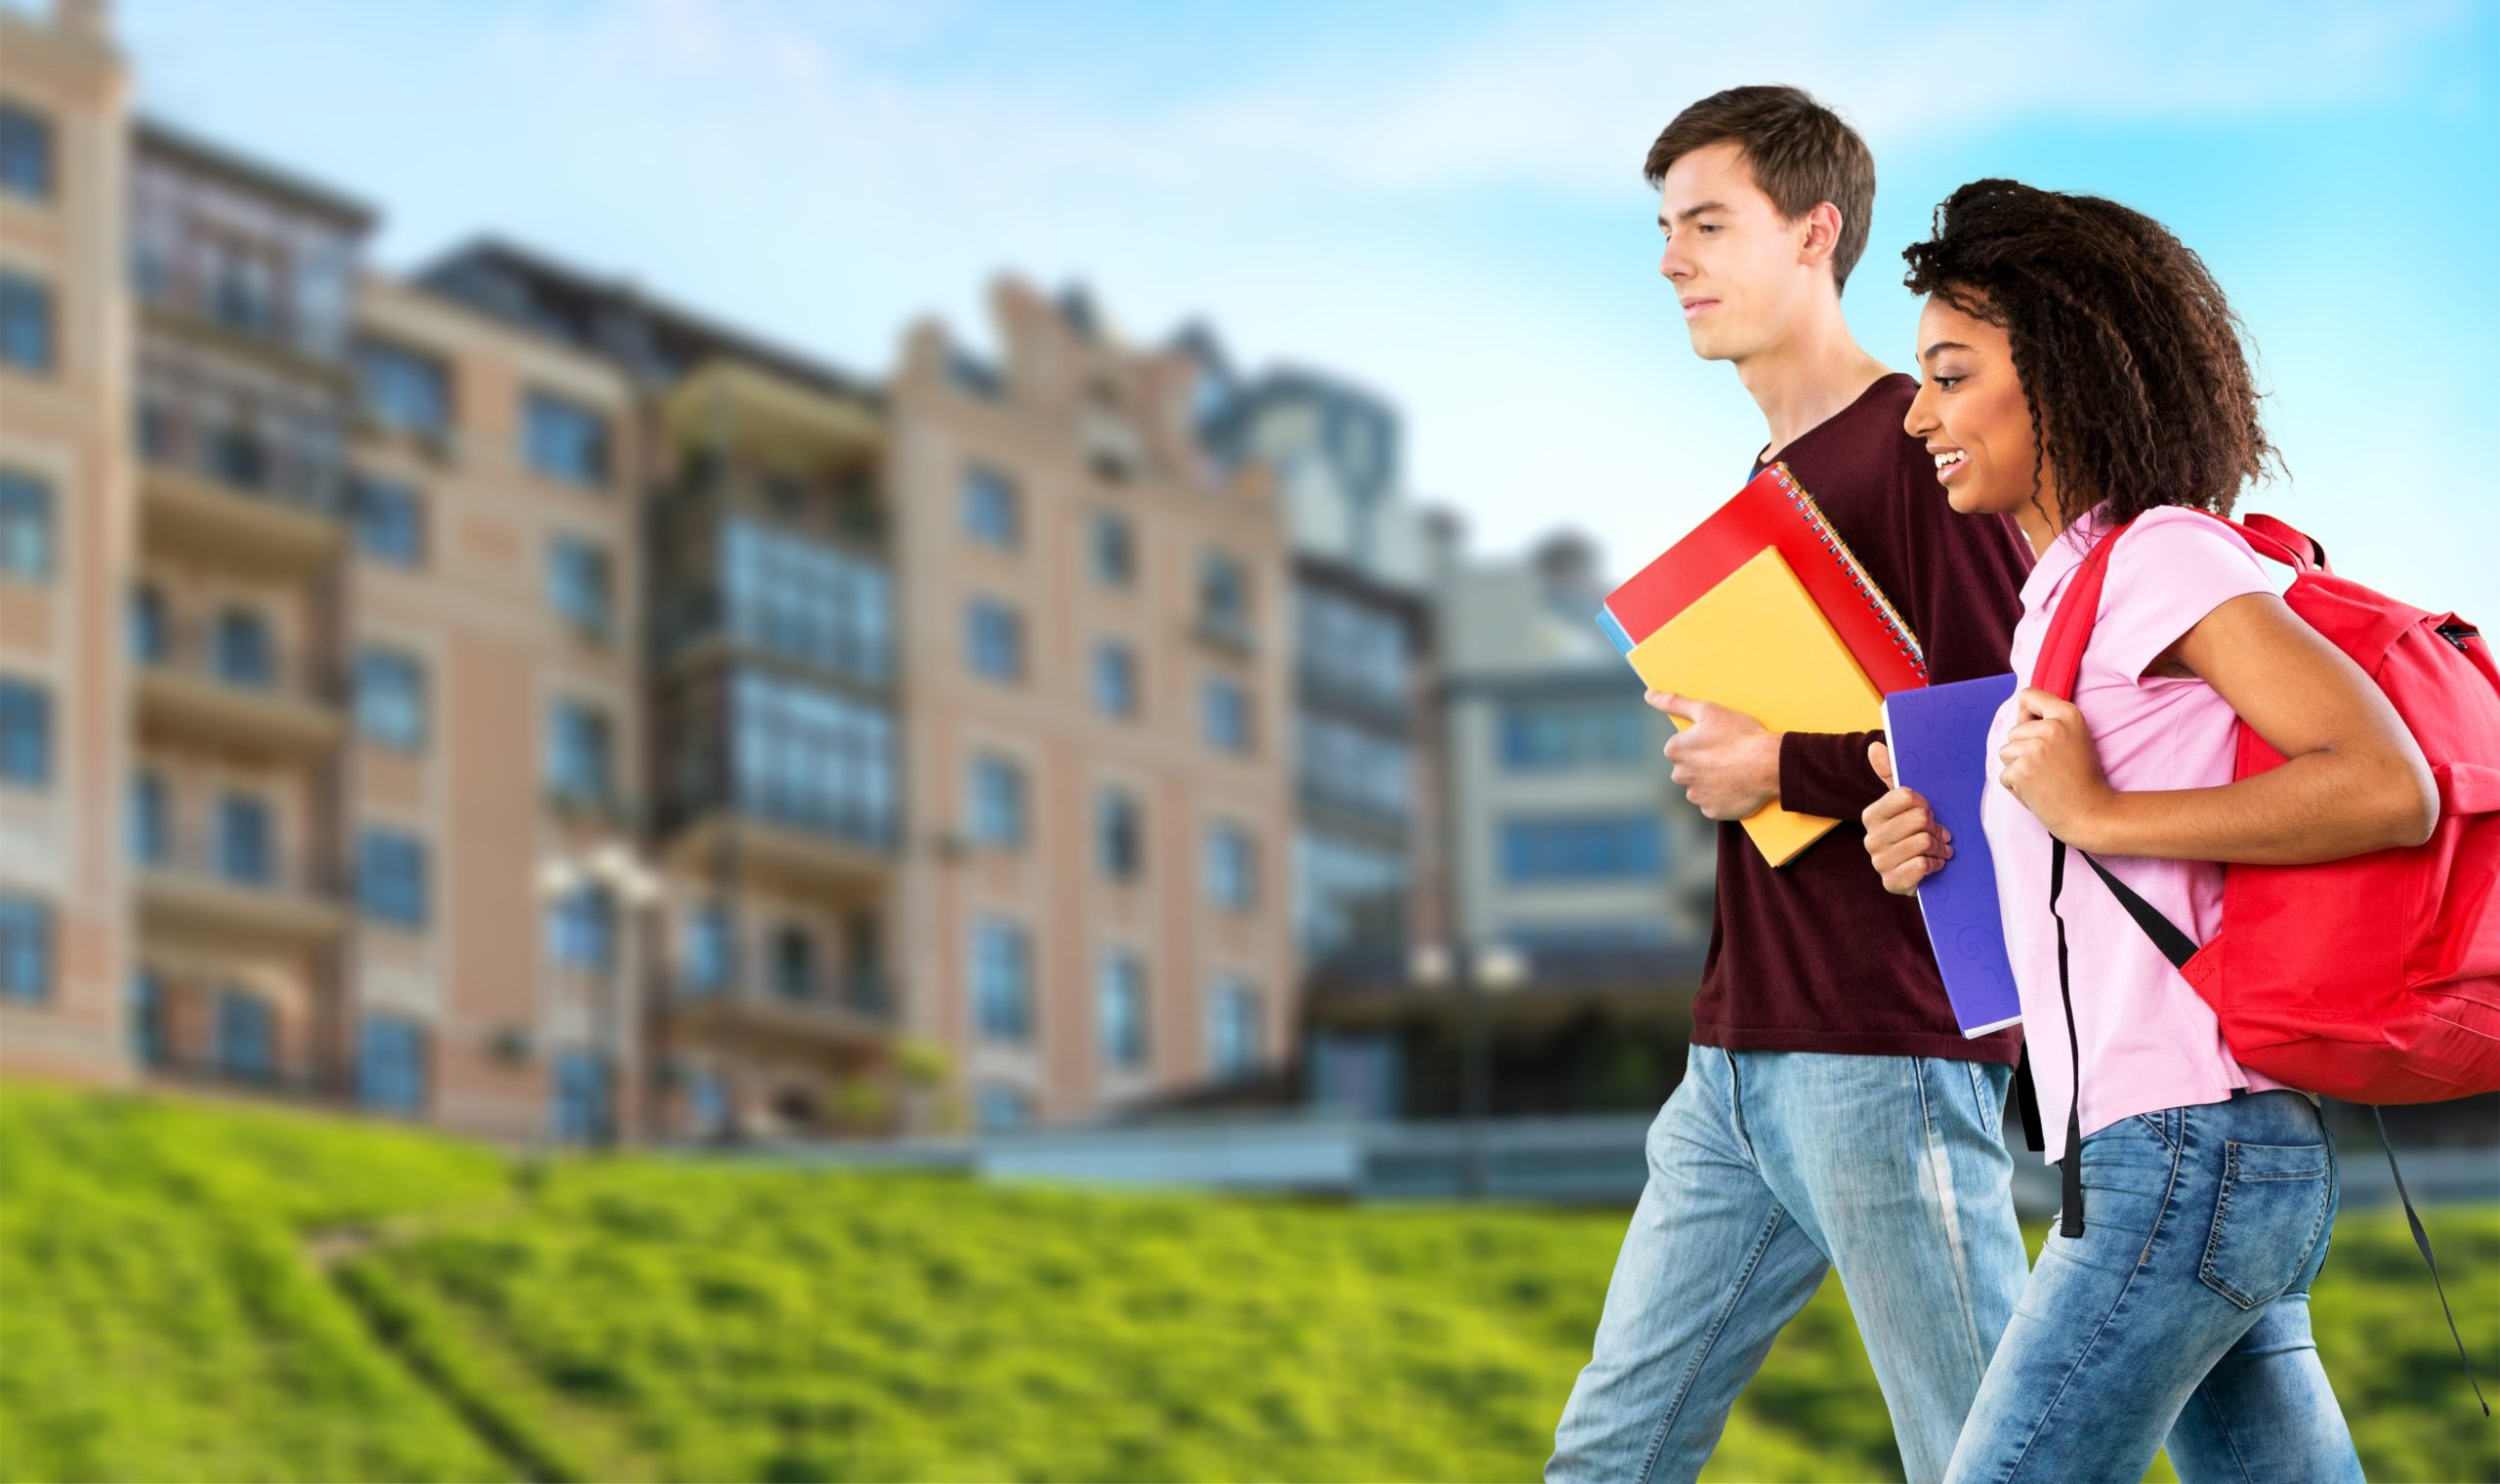 Save Money While Living in Your Student Housing With These Tips